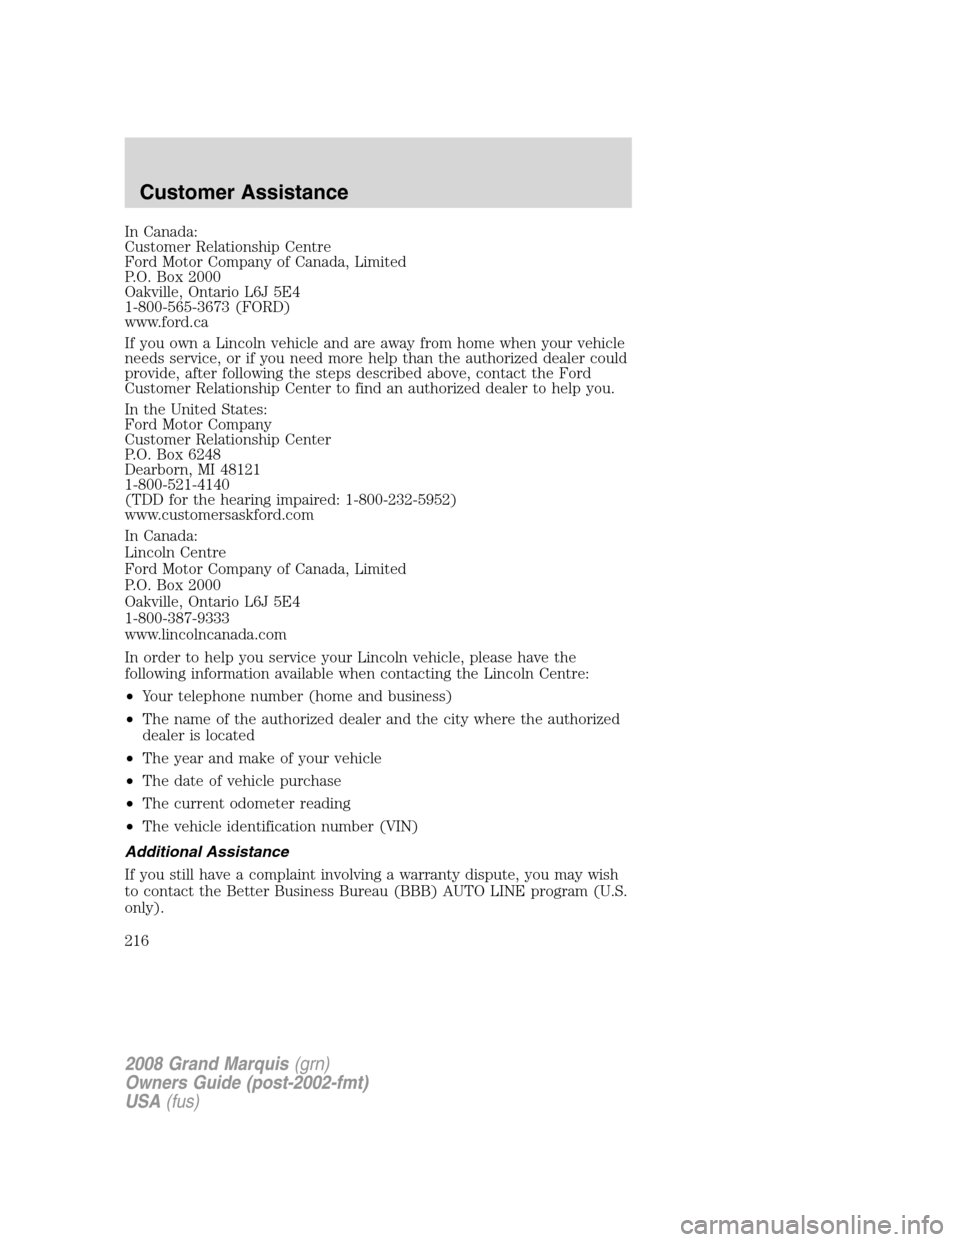 Mercury Grand Marquis 2008  Owners Manuals In Canada:
Customer Relationship Centre
Ford Motor Company of Canada, Limited
P.O. Box 2000
Oakville, Ontario L6J 5E4
1-800-565-3673 (FORD)
www.ford.ca
If you own a Lincoln vehicle and are away from h